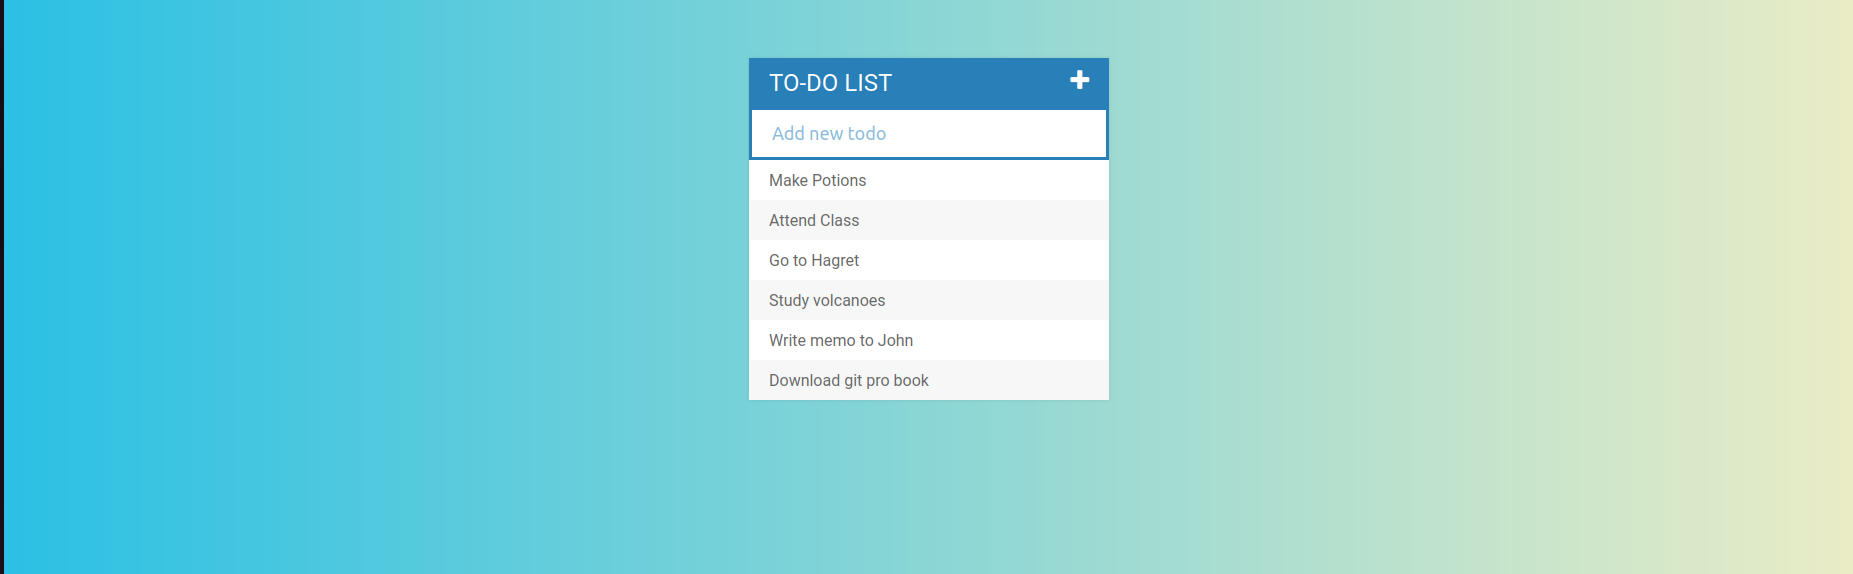 A white tabbed list in front of a bluish background